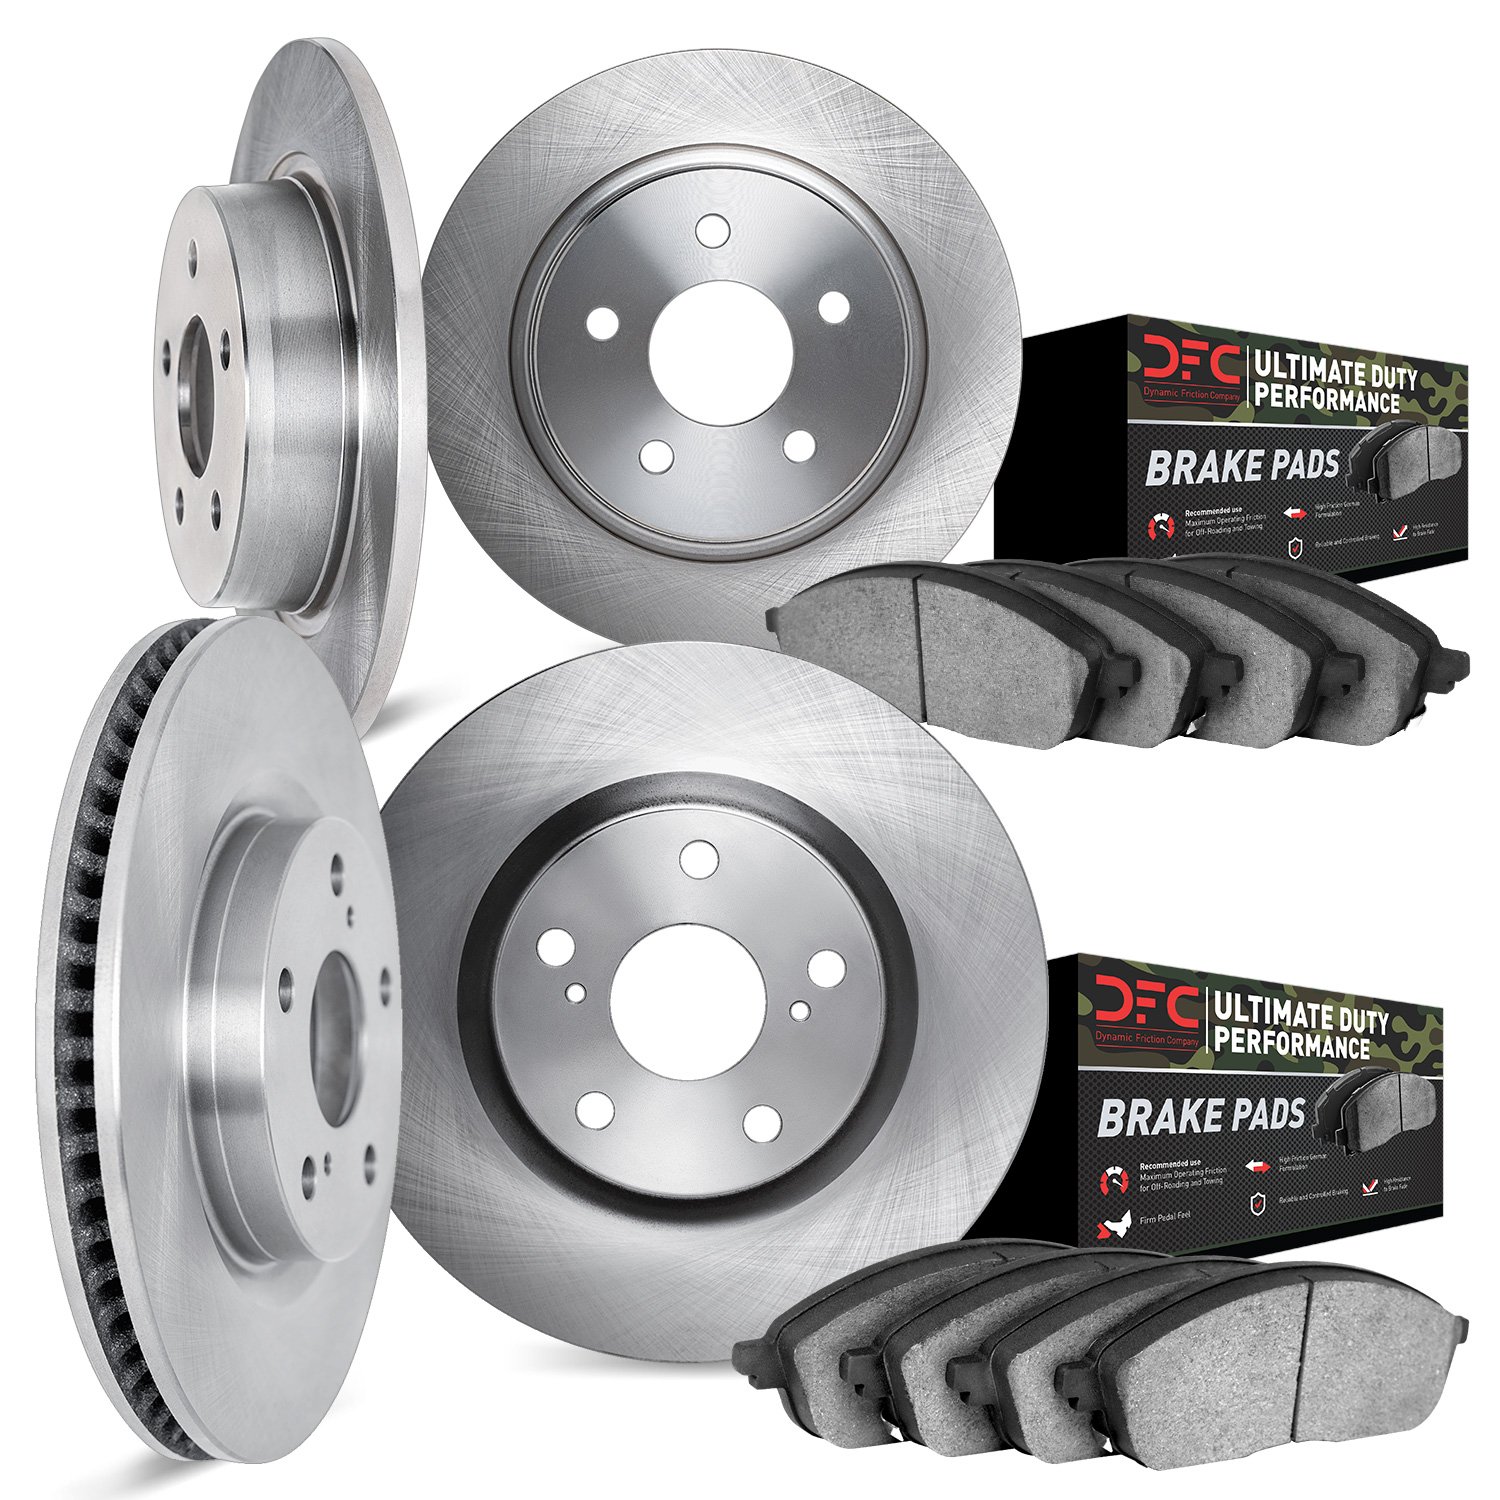 6404-42040 Brake Rotors with Ultimate-Duty Brake Pads, 1999-2002 Mopar, Position: Front and Rear